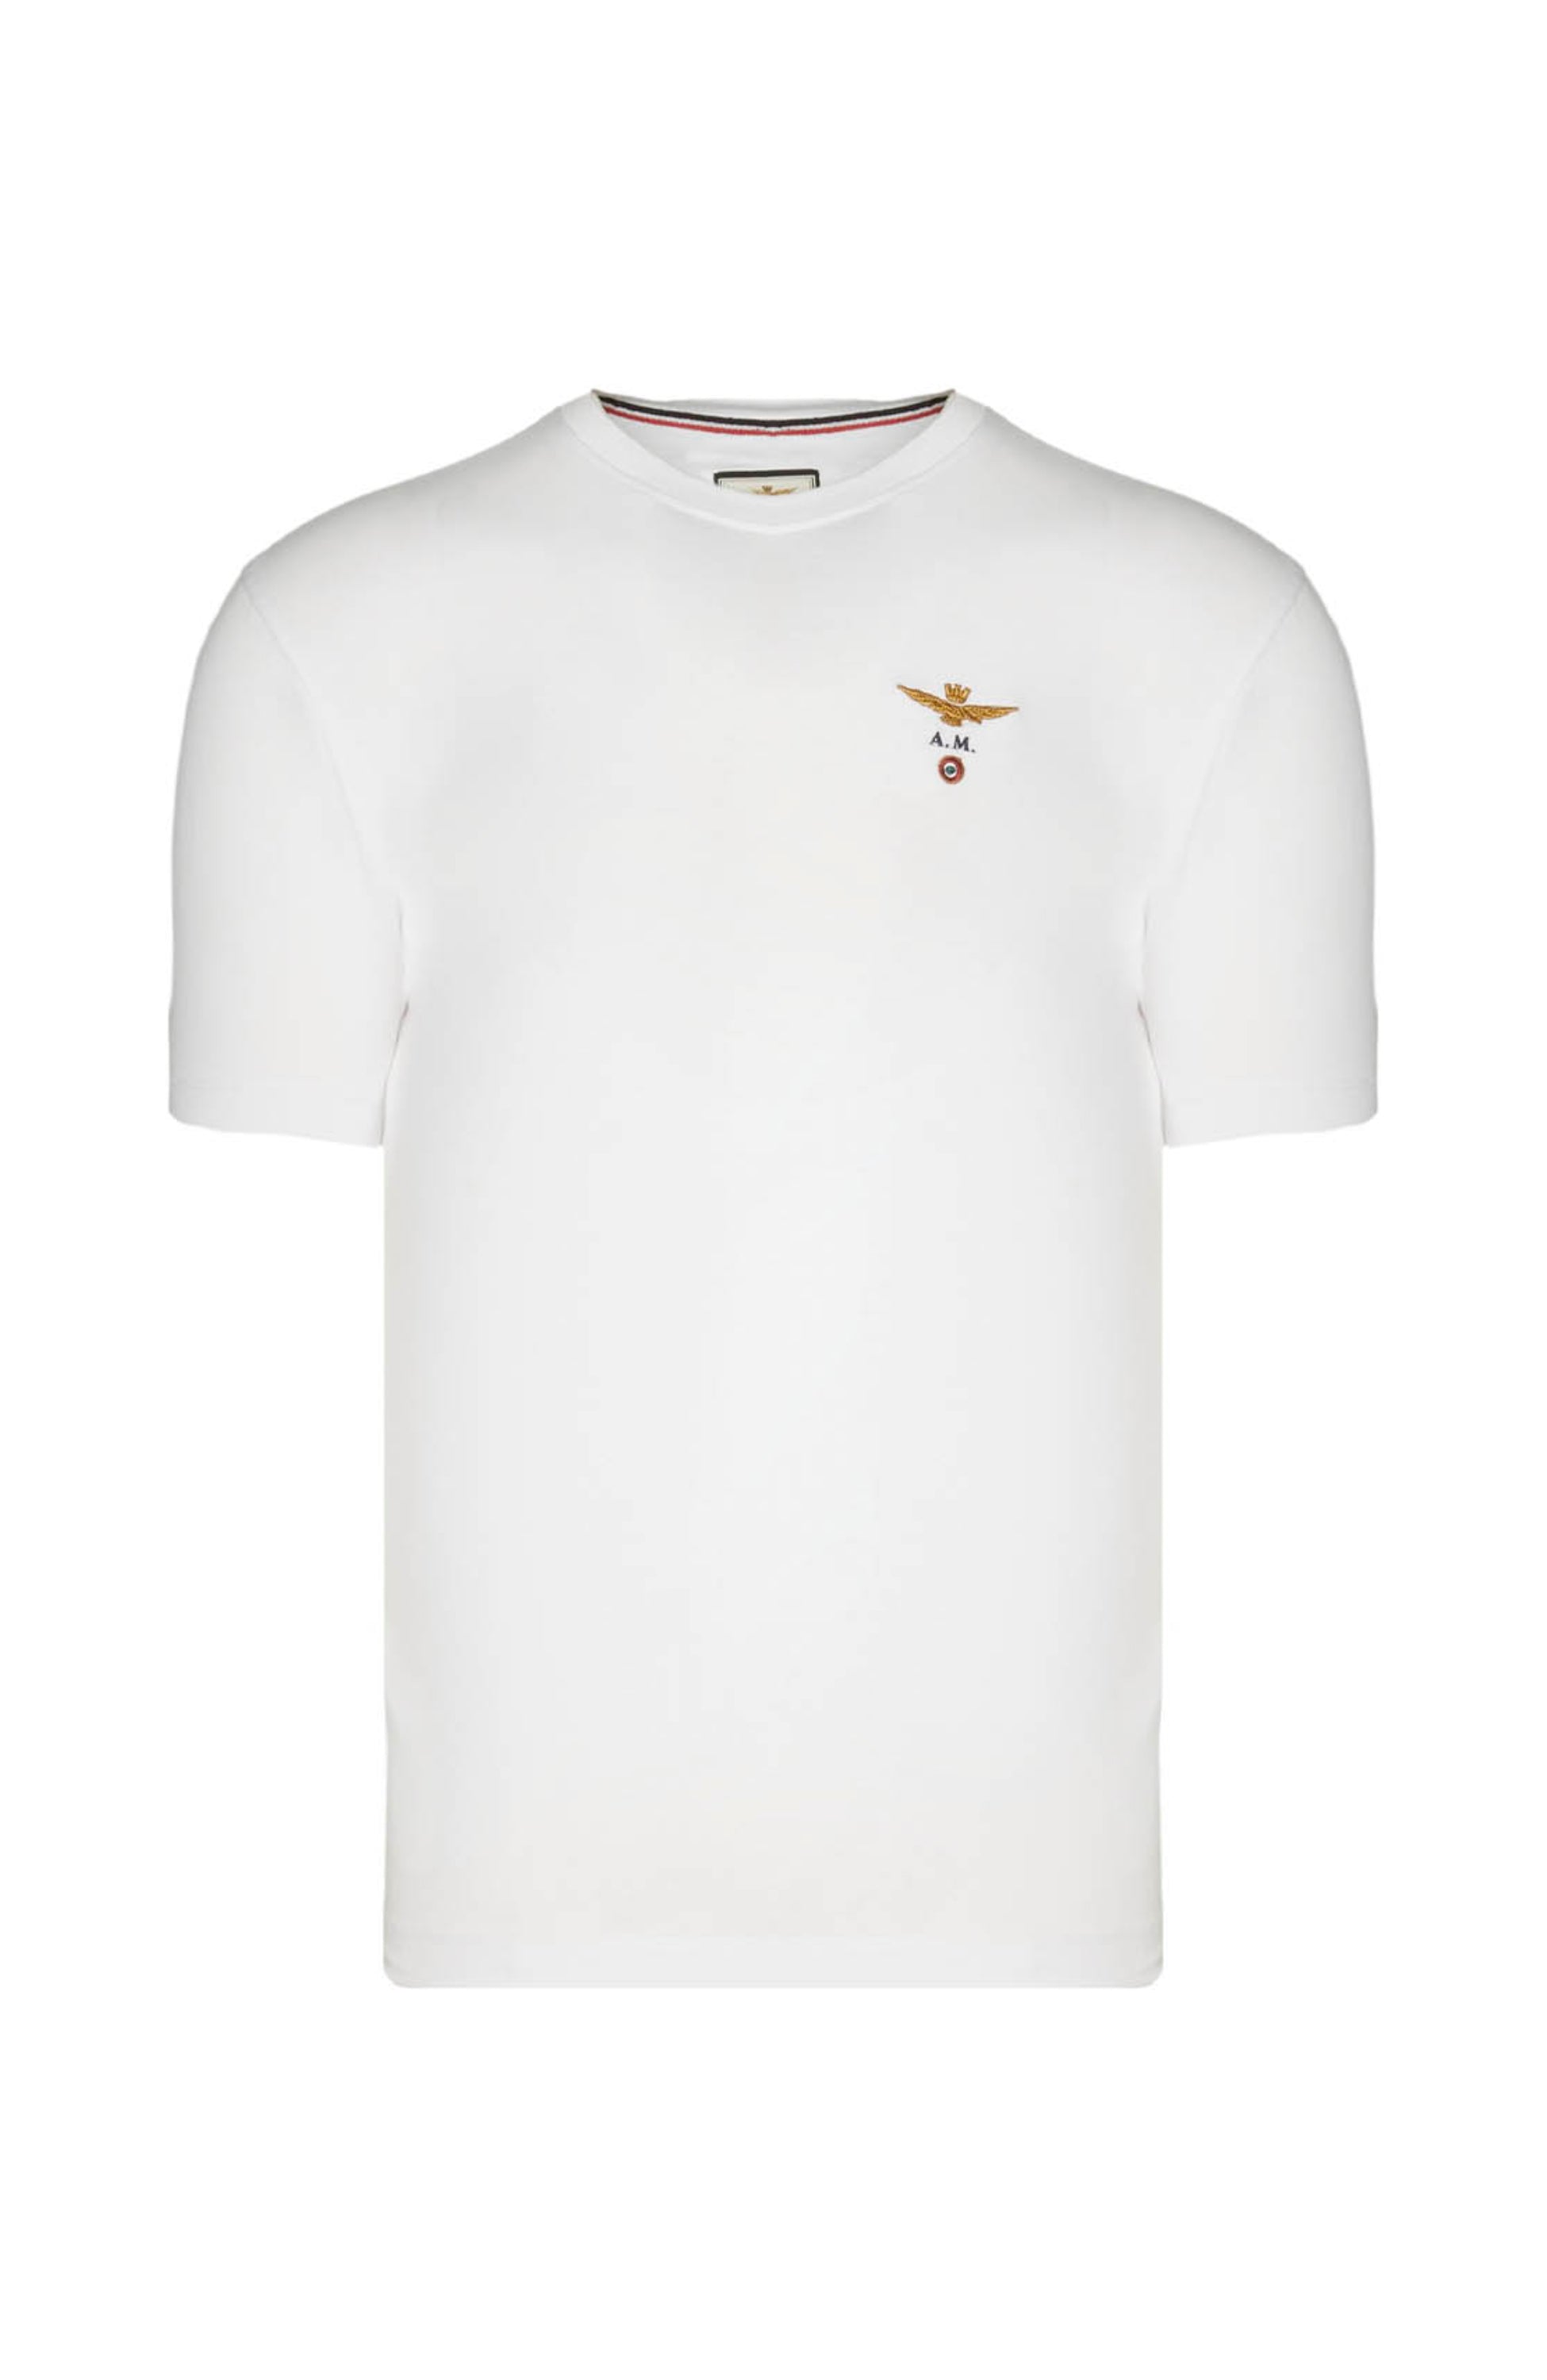 Eagle-embroidered t-shirt